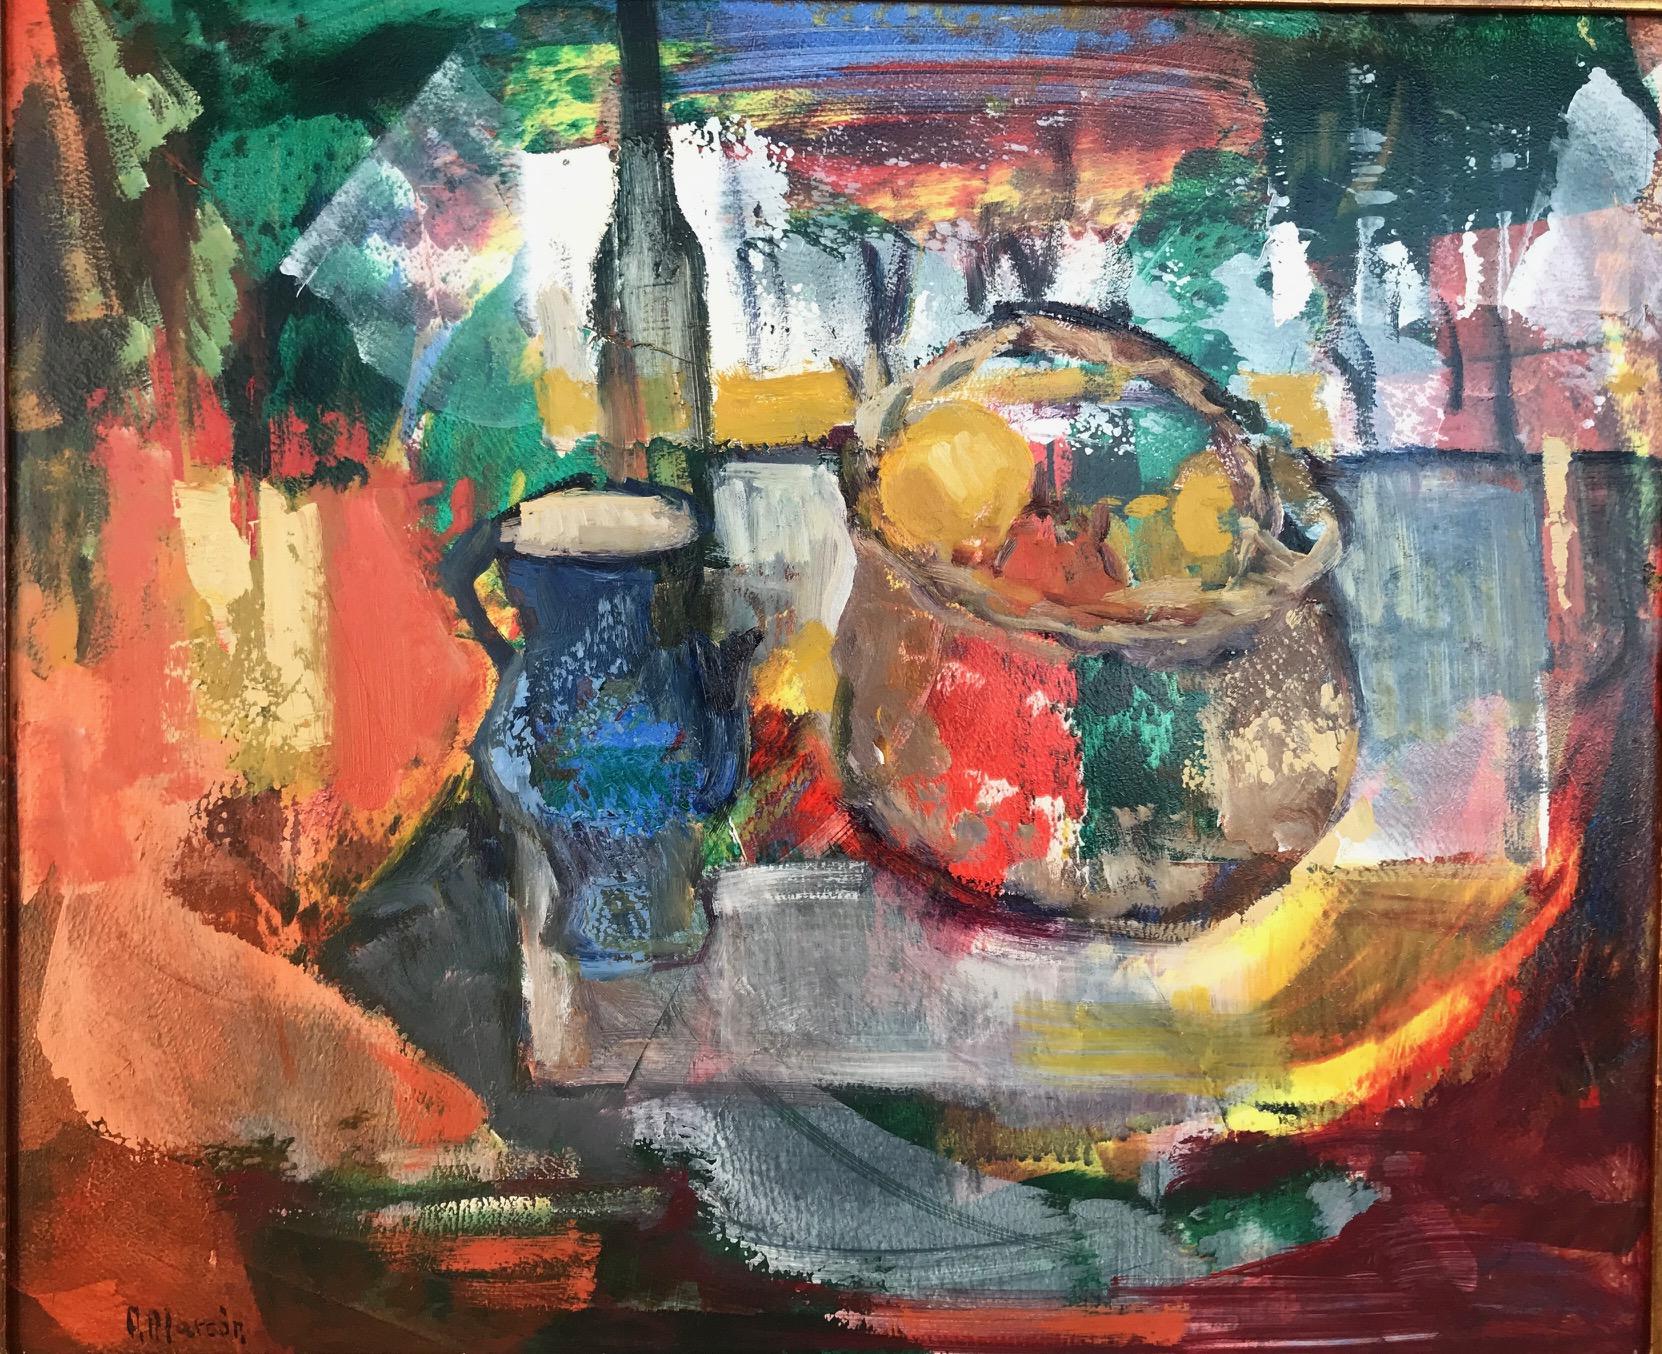 Basket in Red. Oil on panel. Expressionist Still-life with abstract background - Brown Figurative Painting by Aracely Alarcón